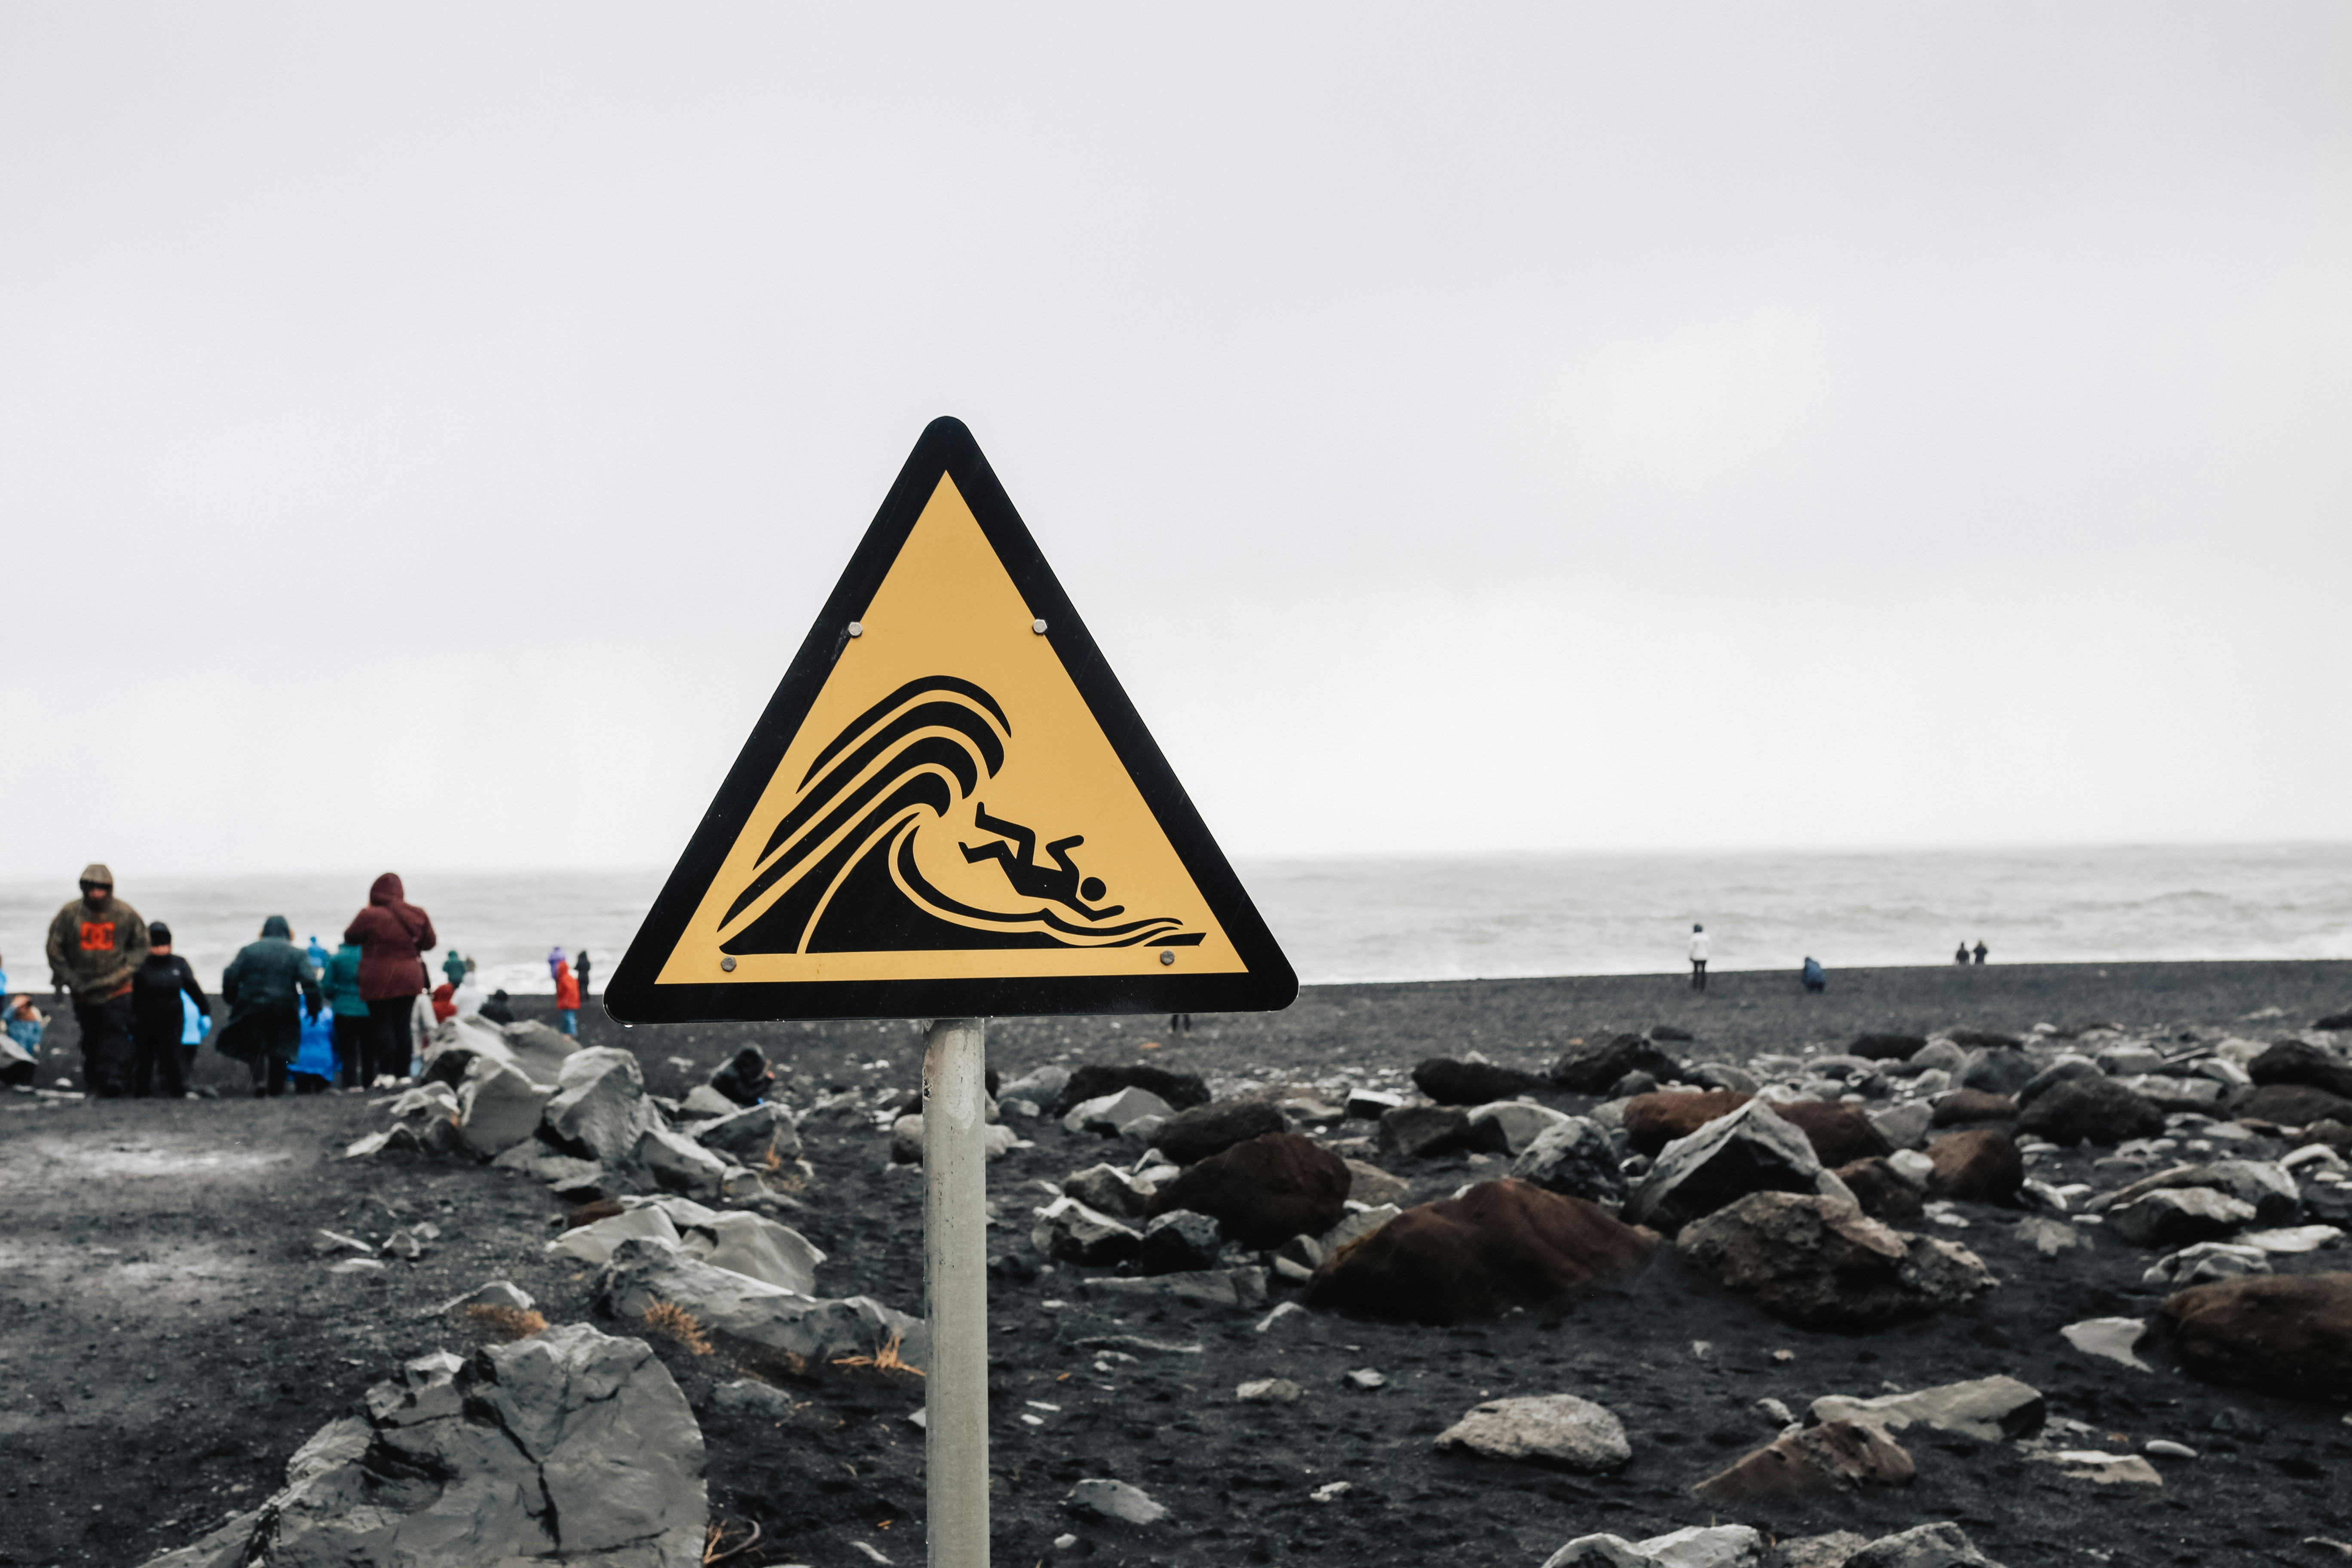 The warning sign at Reynisfjara Beach warning visitors not to stand too close to the edge because of "sneaker waves" that can drag you (and your car) into the Atlantic Ocean.